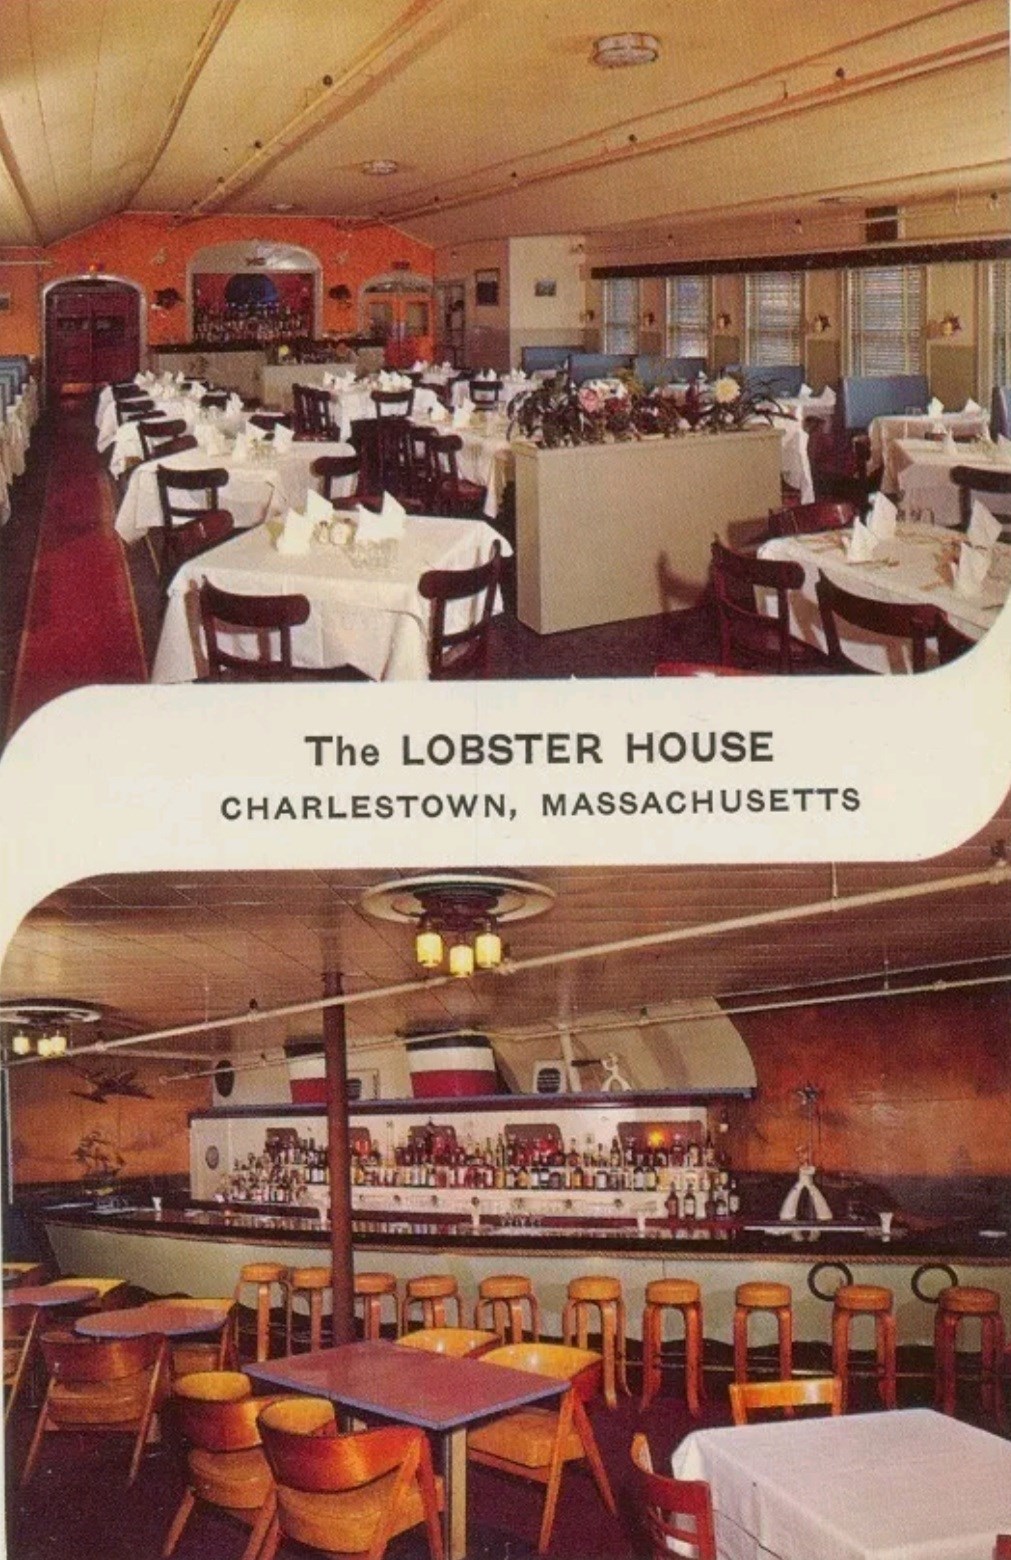 Ad showing pictures of the inside of a restaurant with text: The Lobster House, Charlestown, Massachusetts.